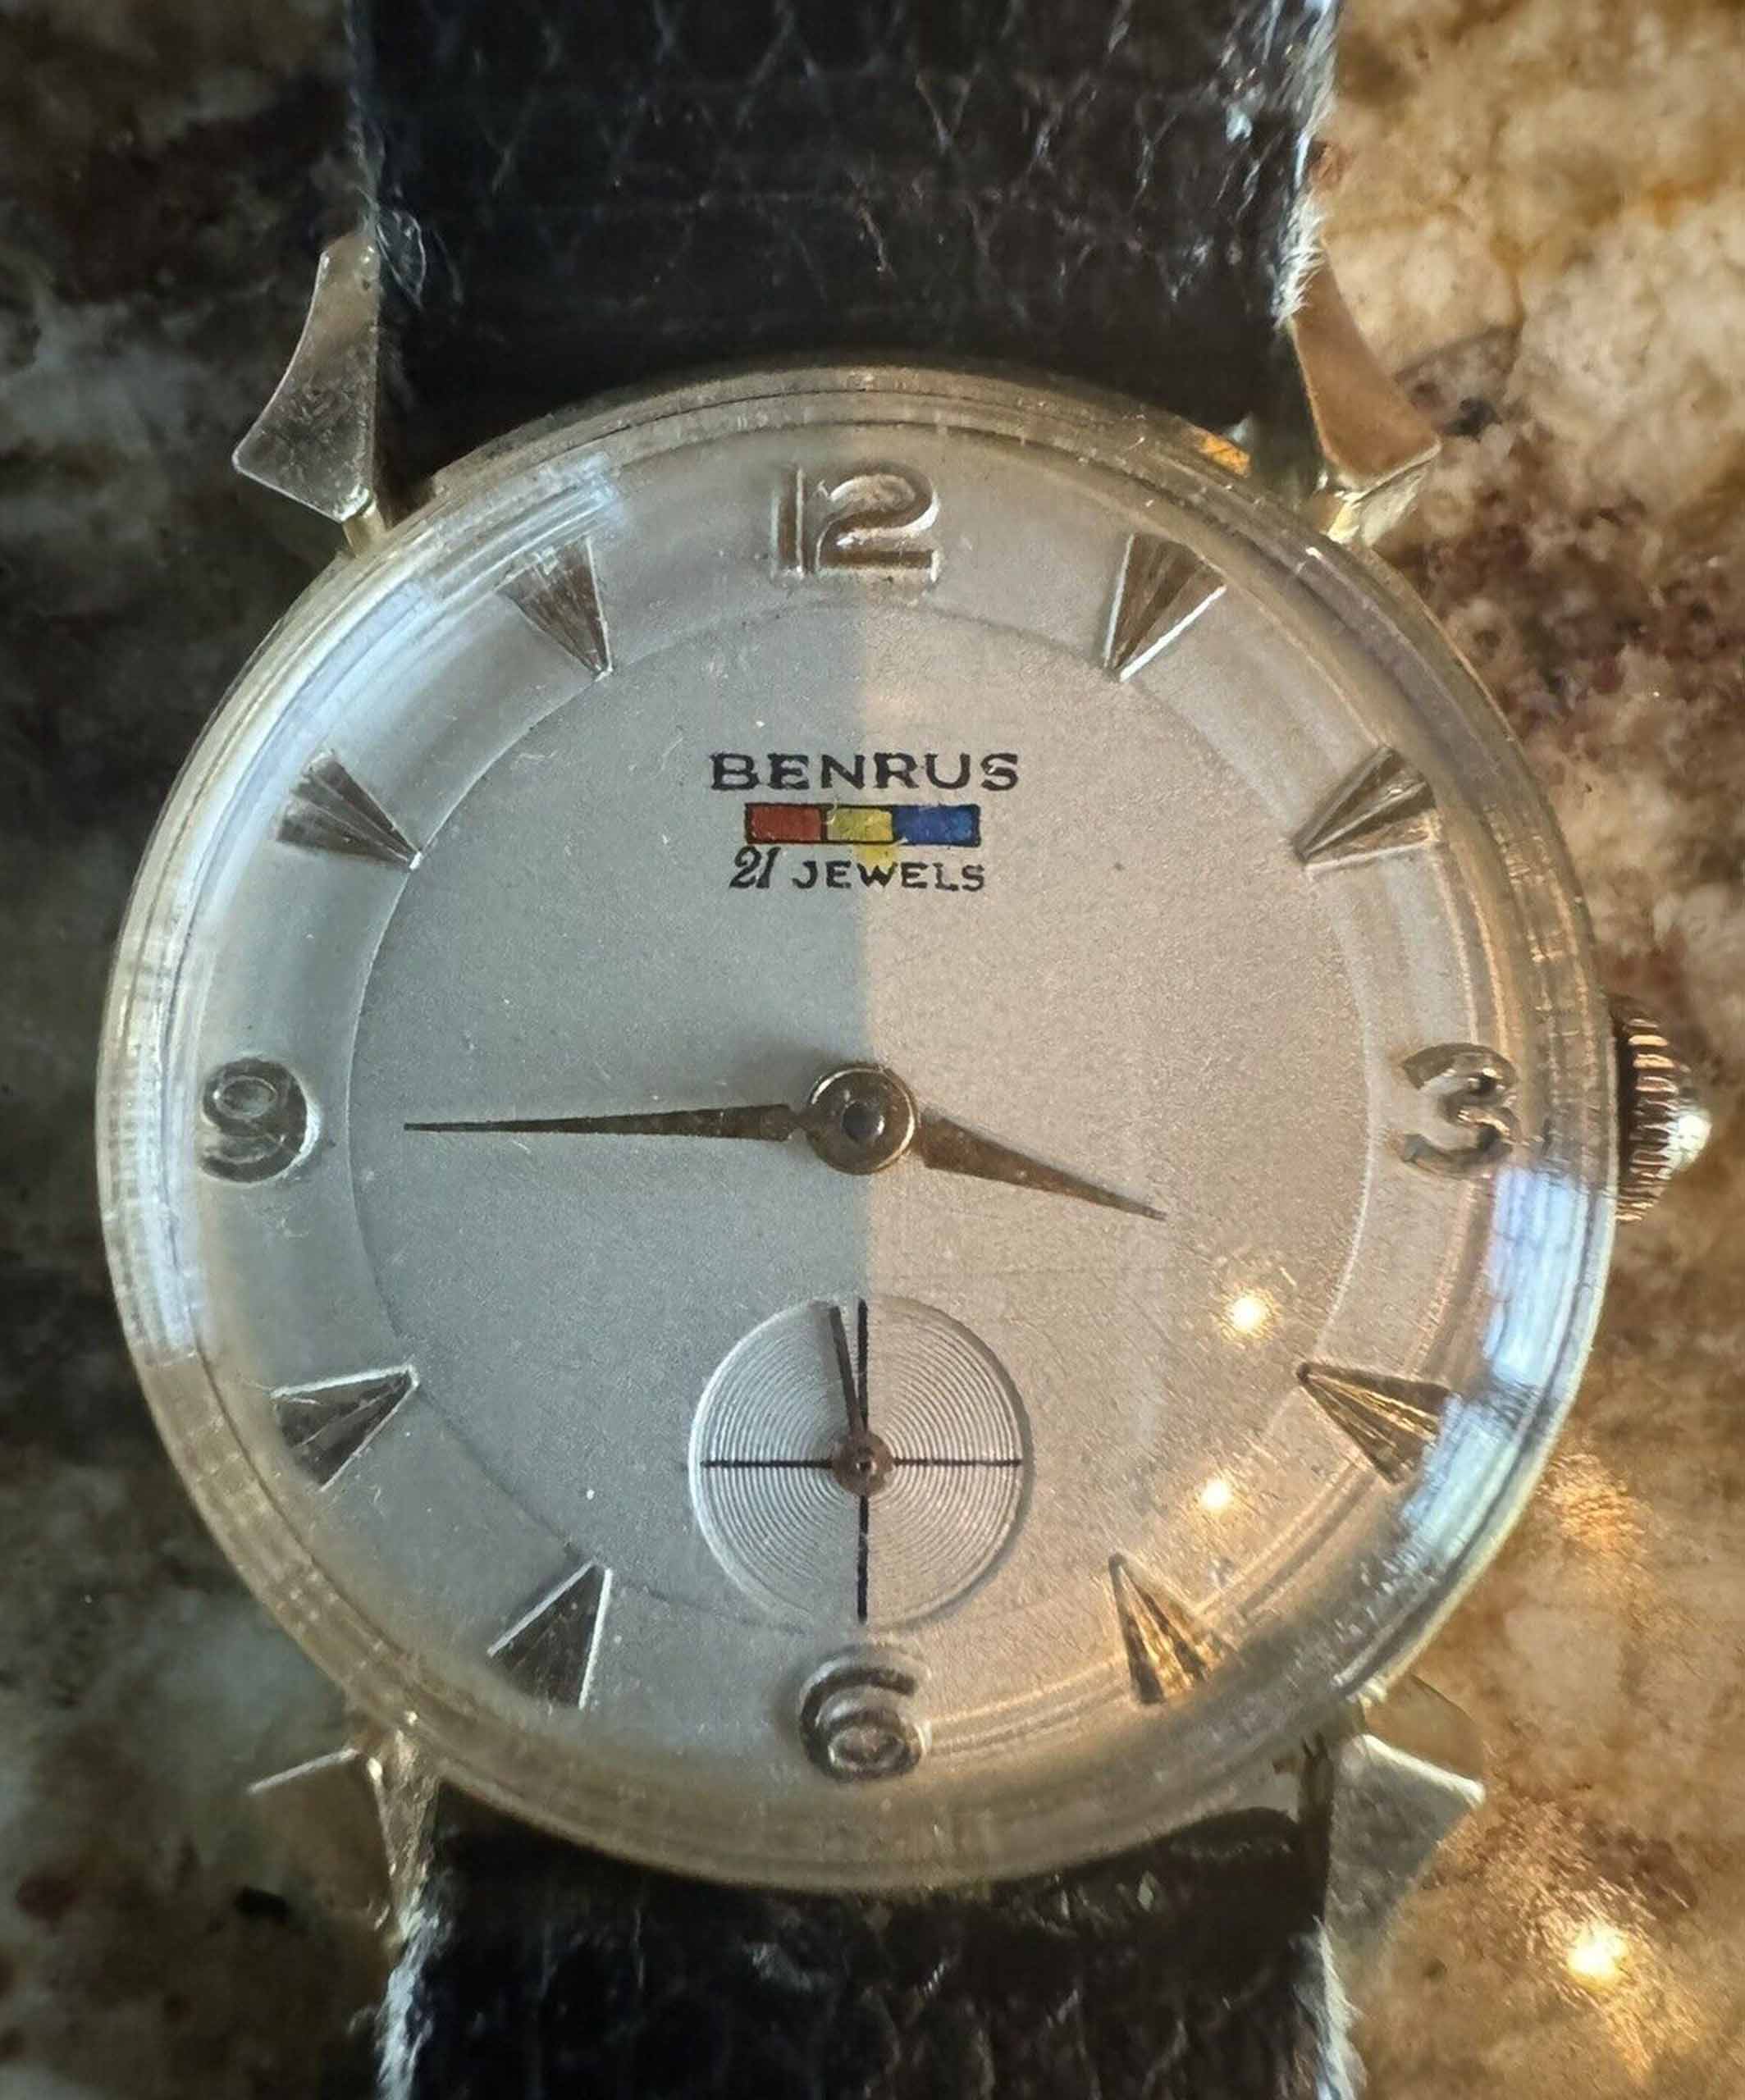 eBay Finds: A Rare Omega with the Full Kit, a Certina Chronograph in Great Condition, and a Pair of Fantastic Bulovas